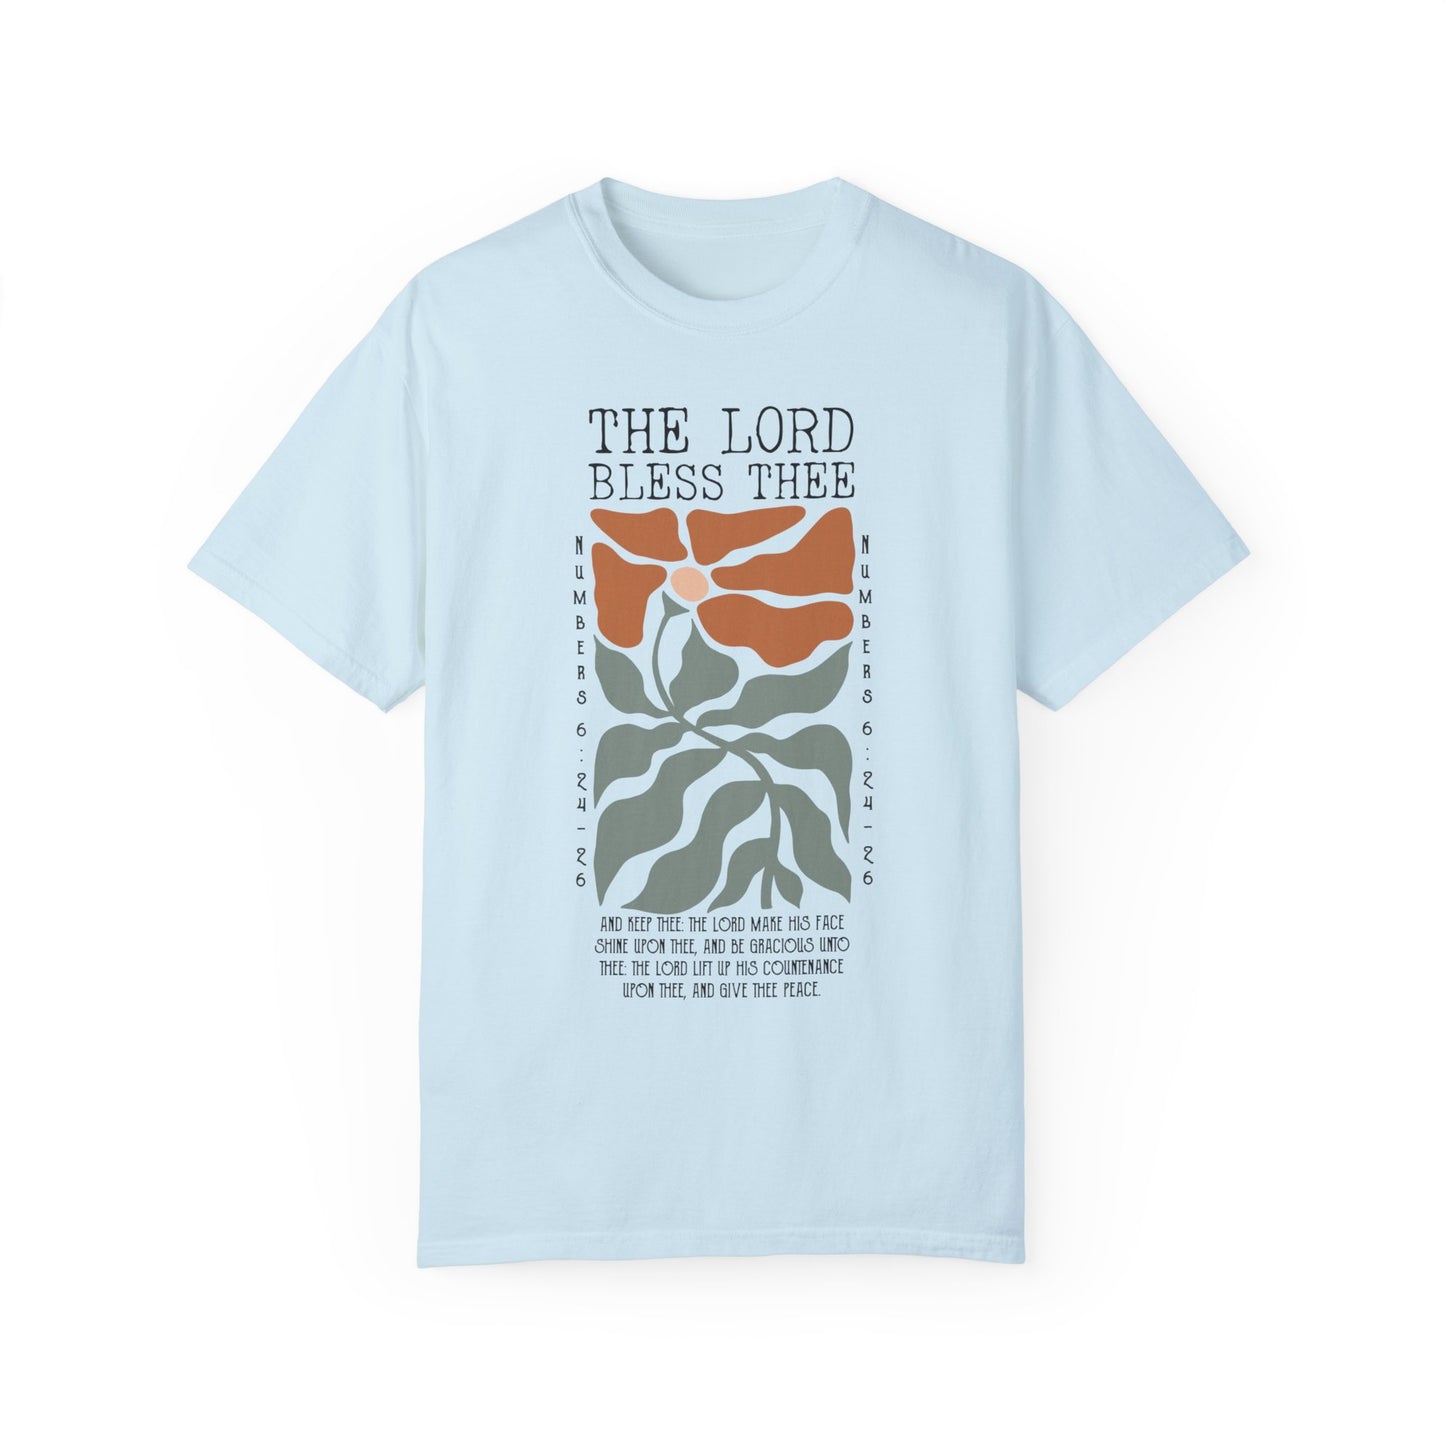 The Lord Bless Thee Unisex Garment-Dyed T-shirt